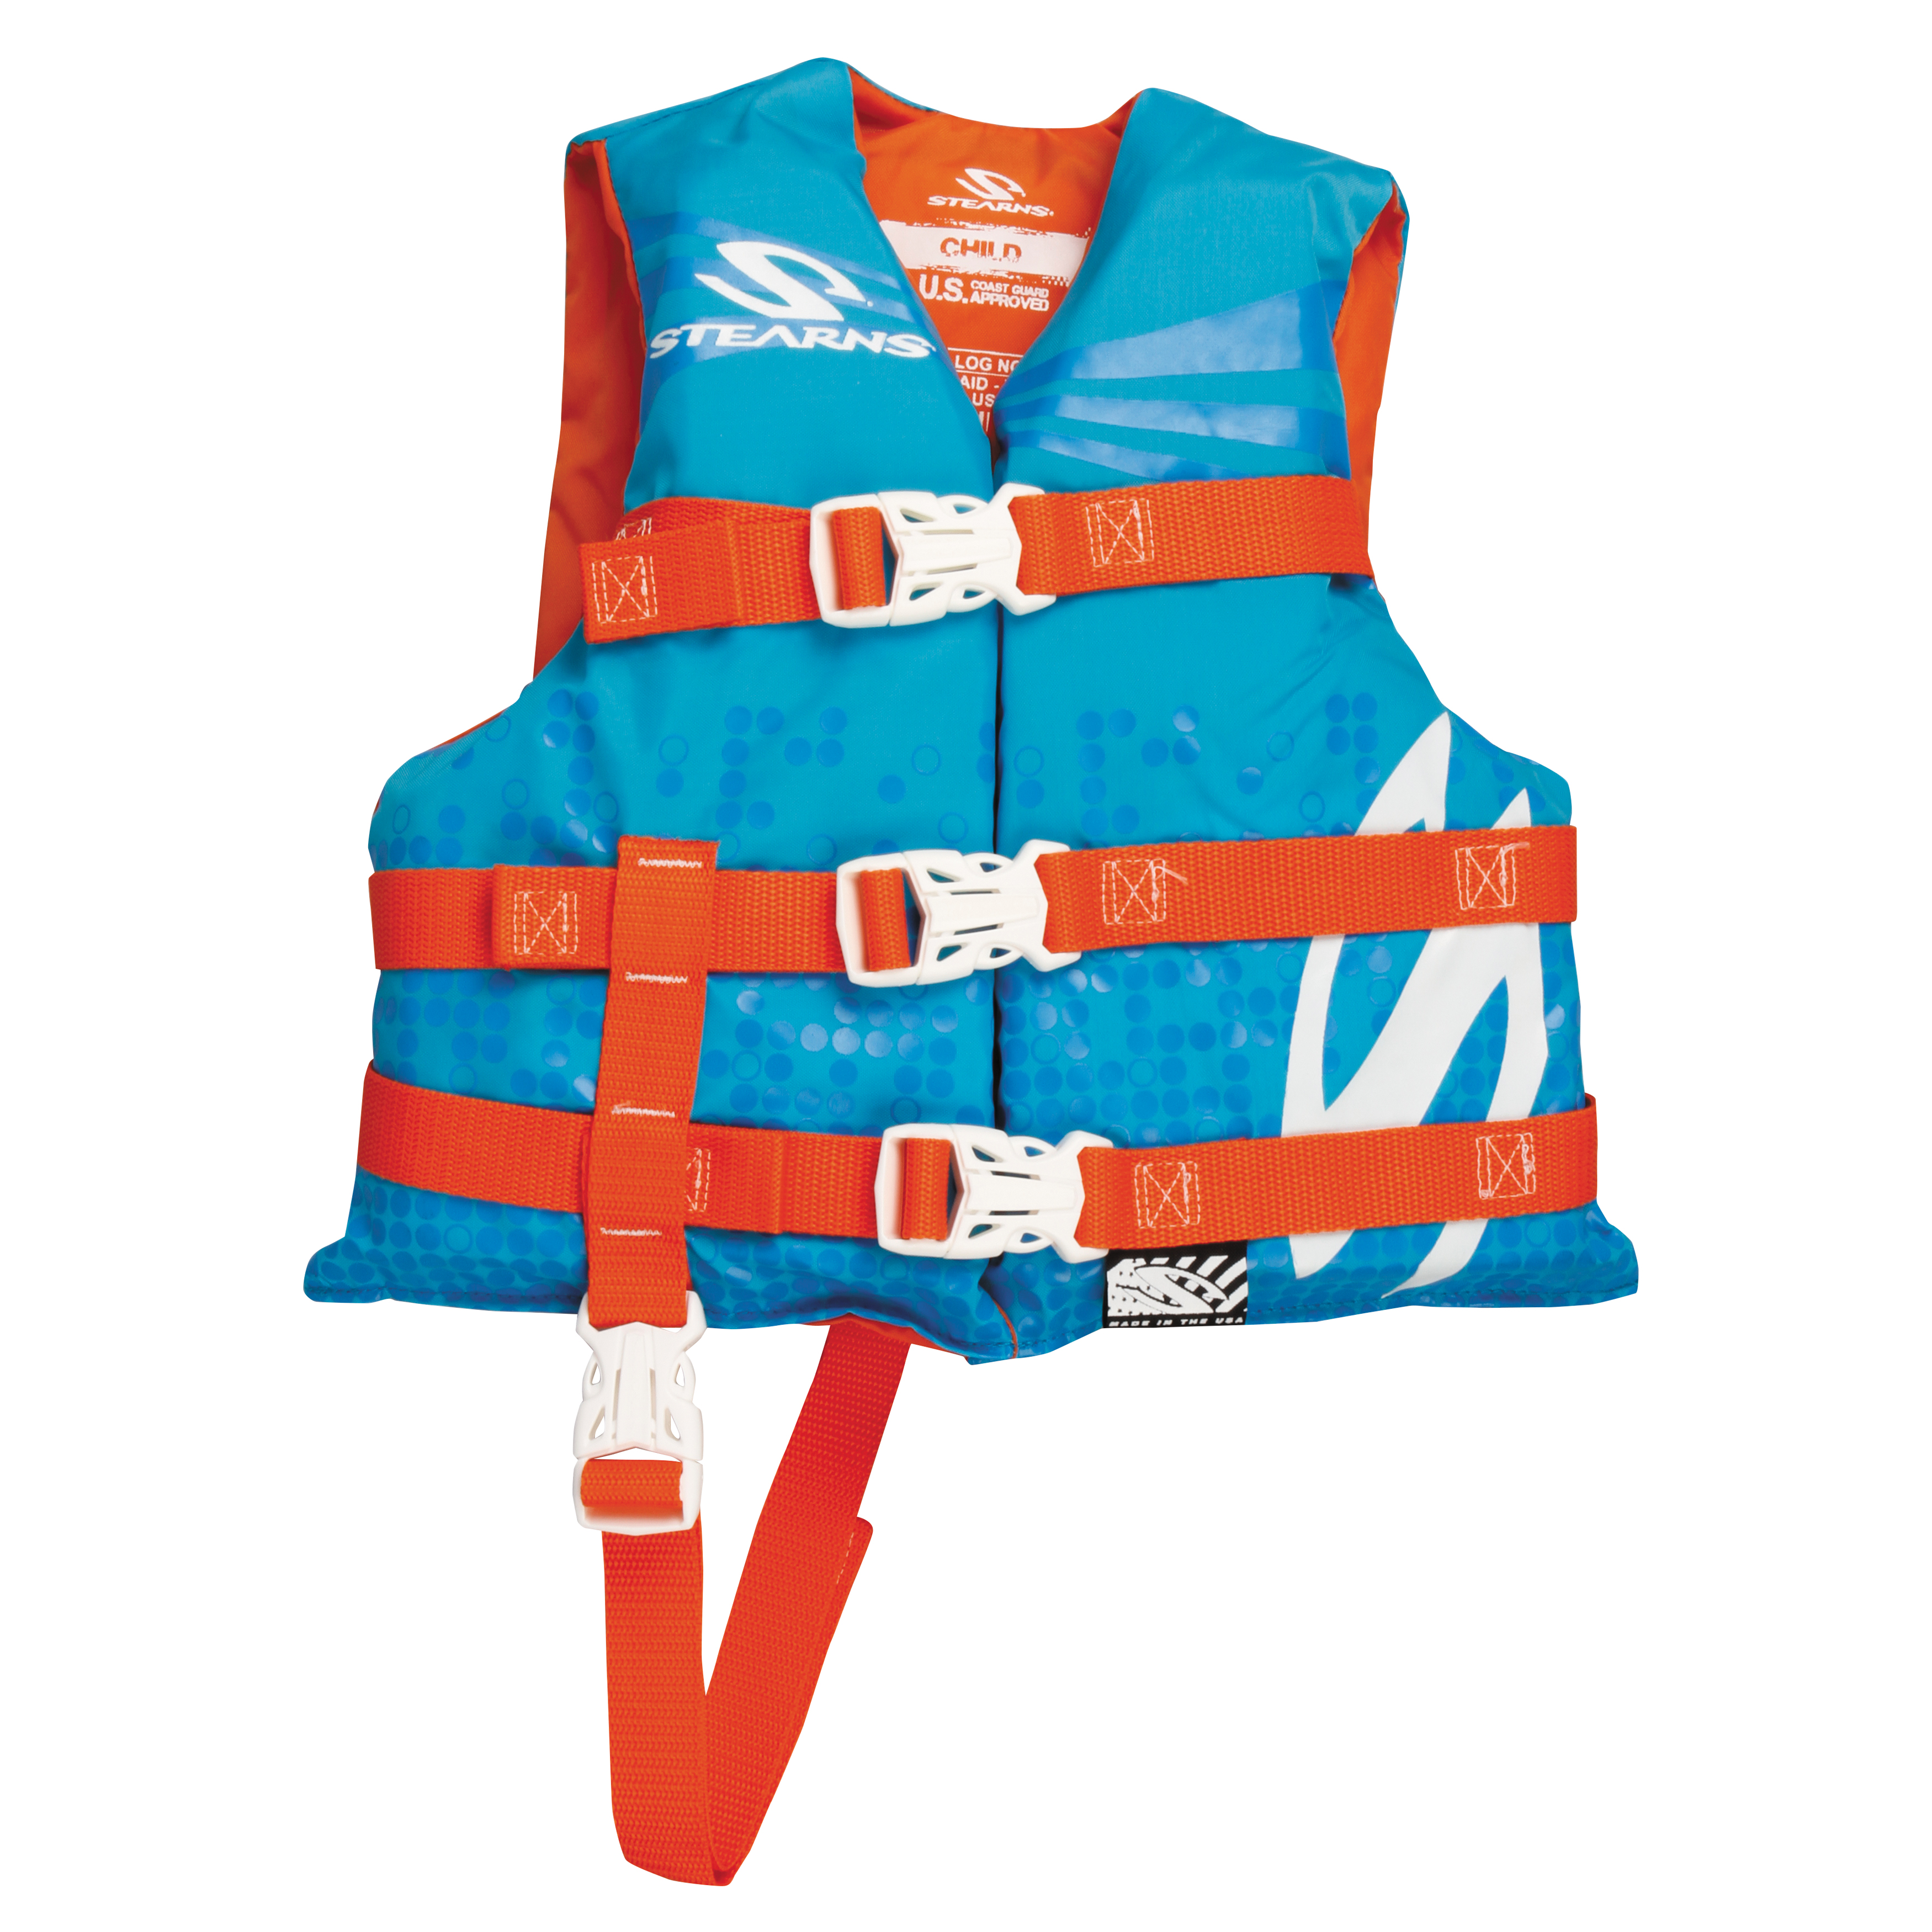 Stearns PFD 3004 Classic Child Blue C006 3000002196 for sale online 